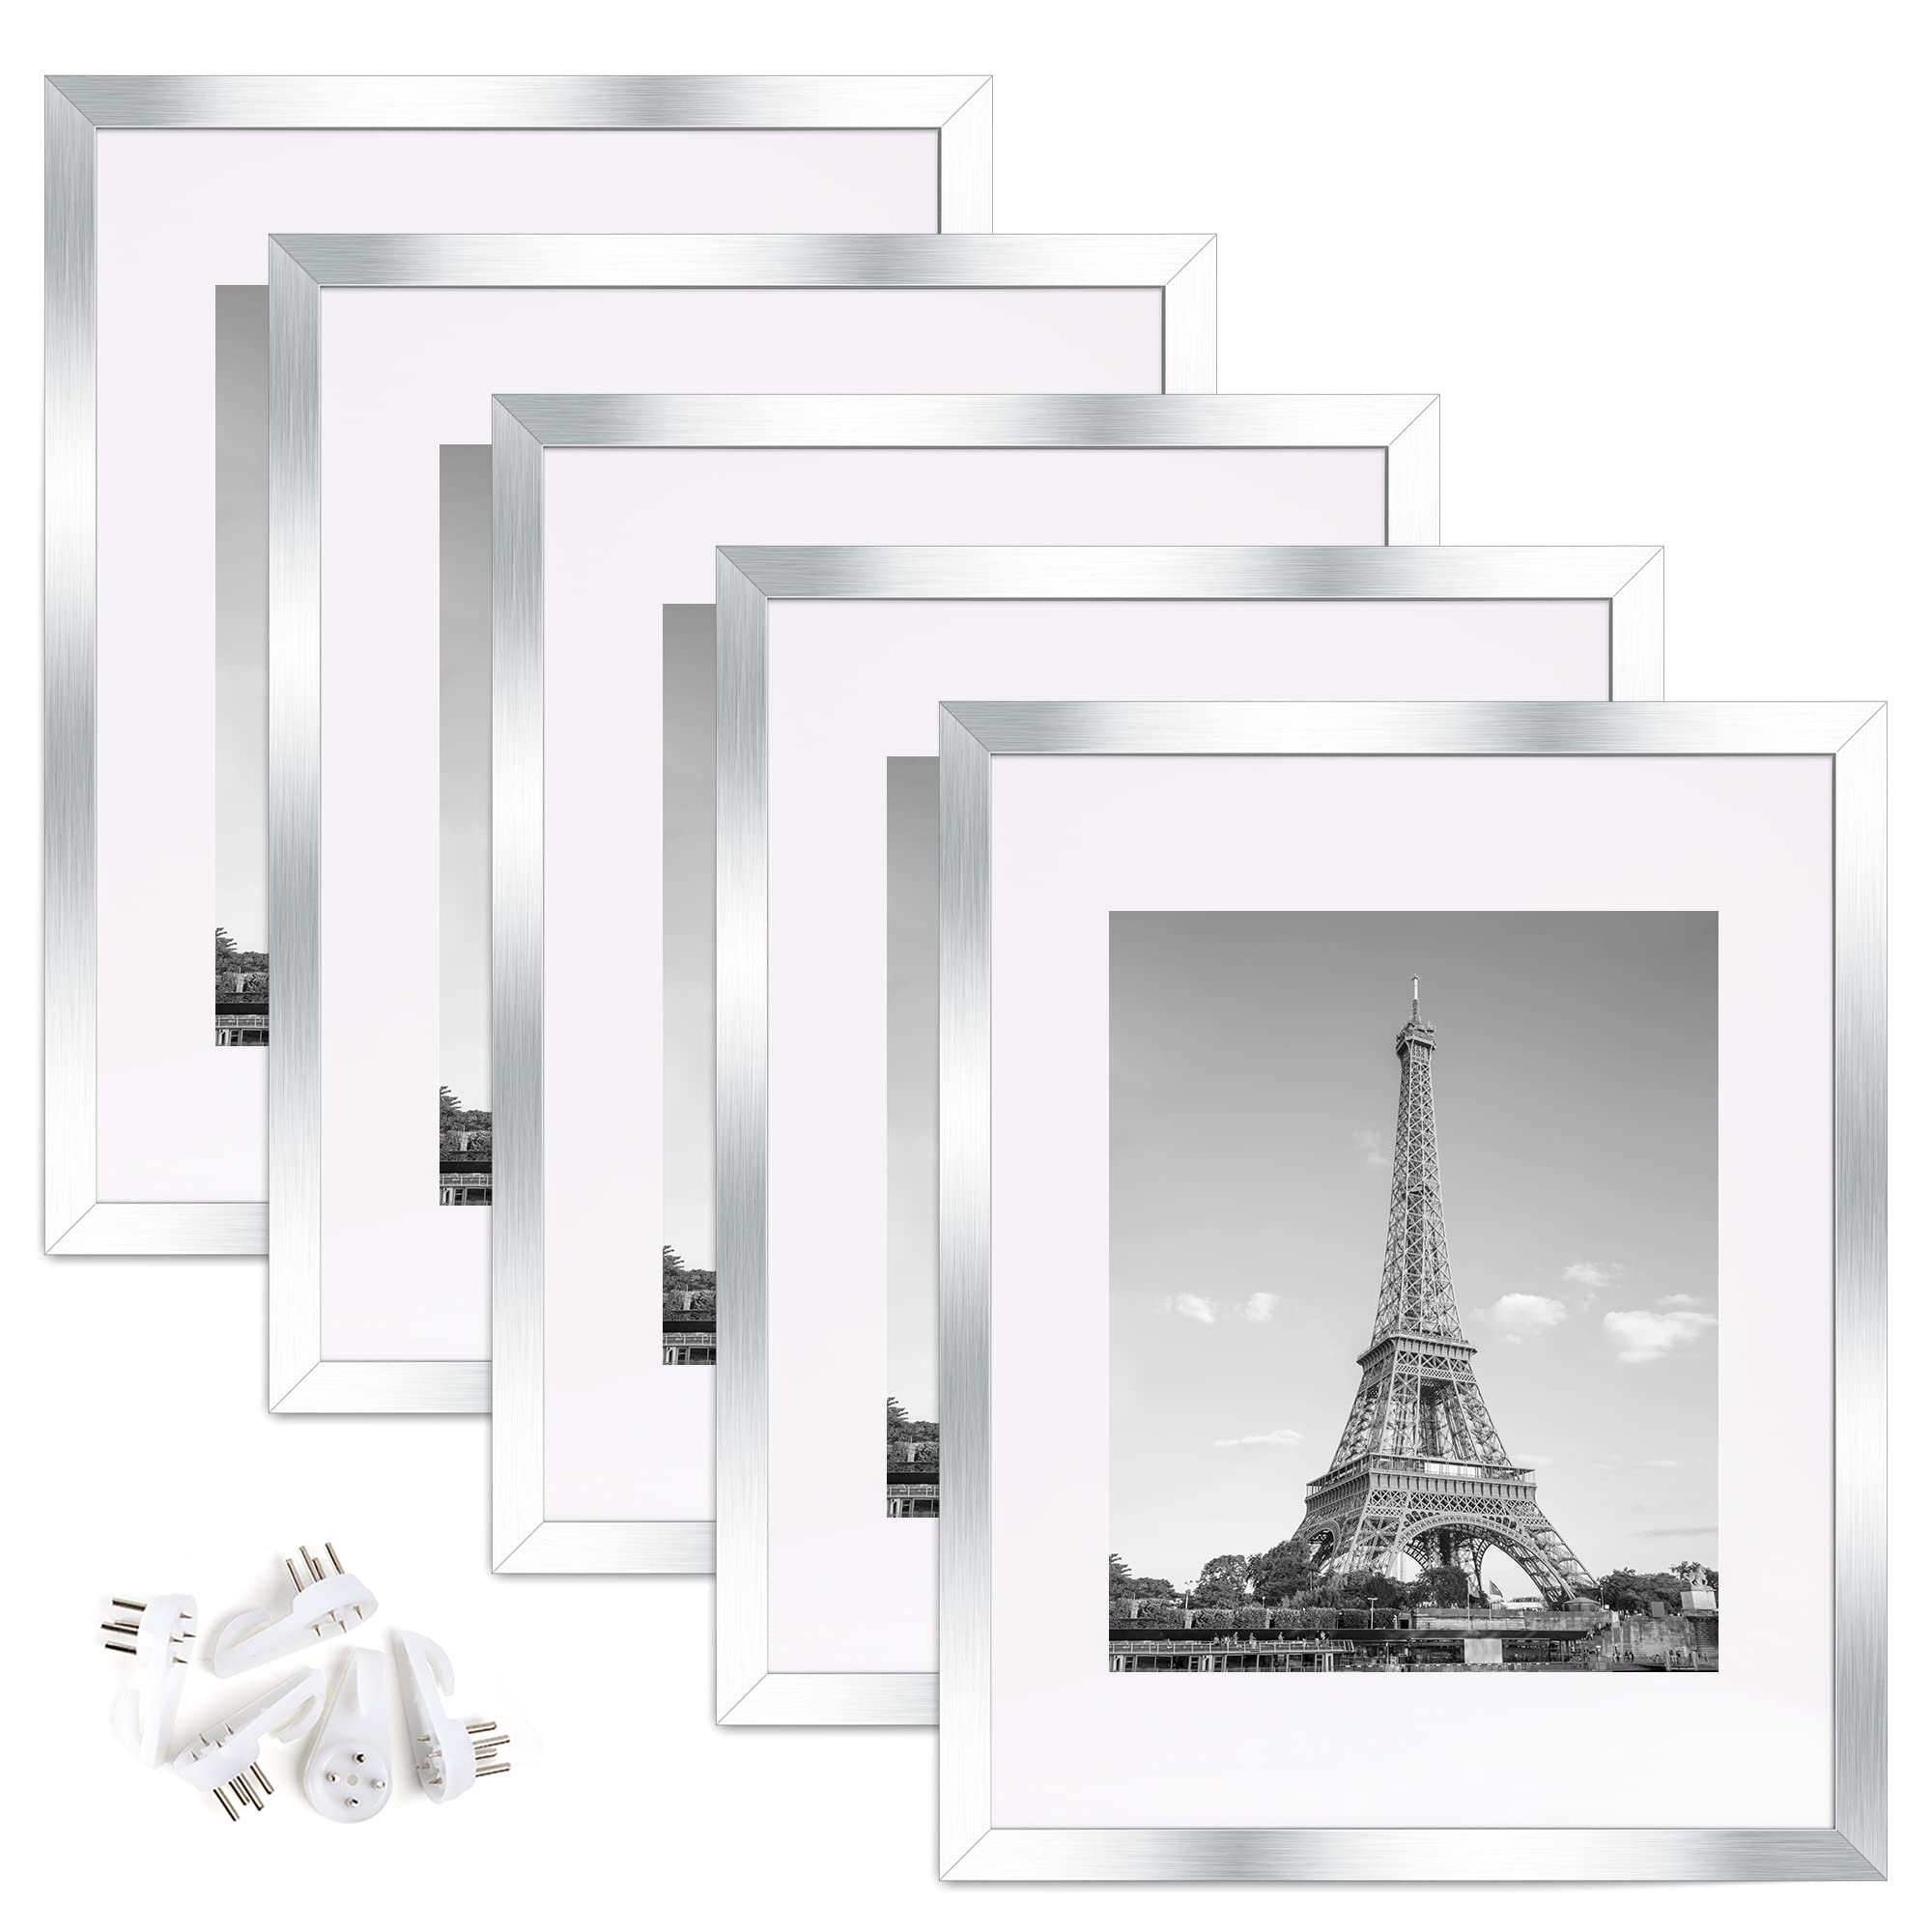 upsimples 16x20 Picture Frame Set of 5, Display Pictures 11x14 with Ma –  Upsimples Direct